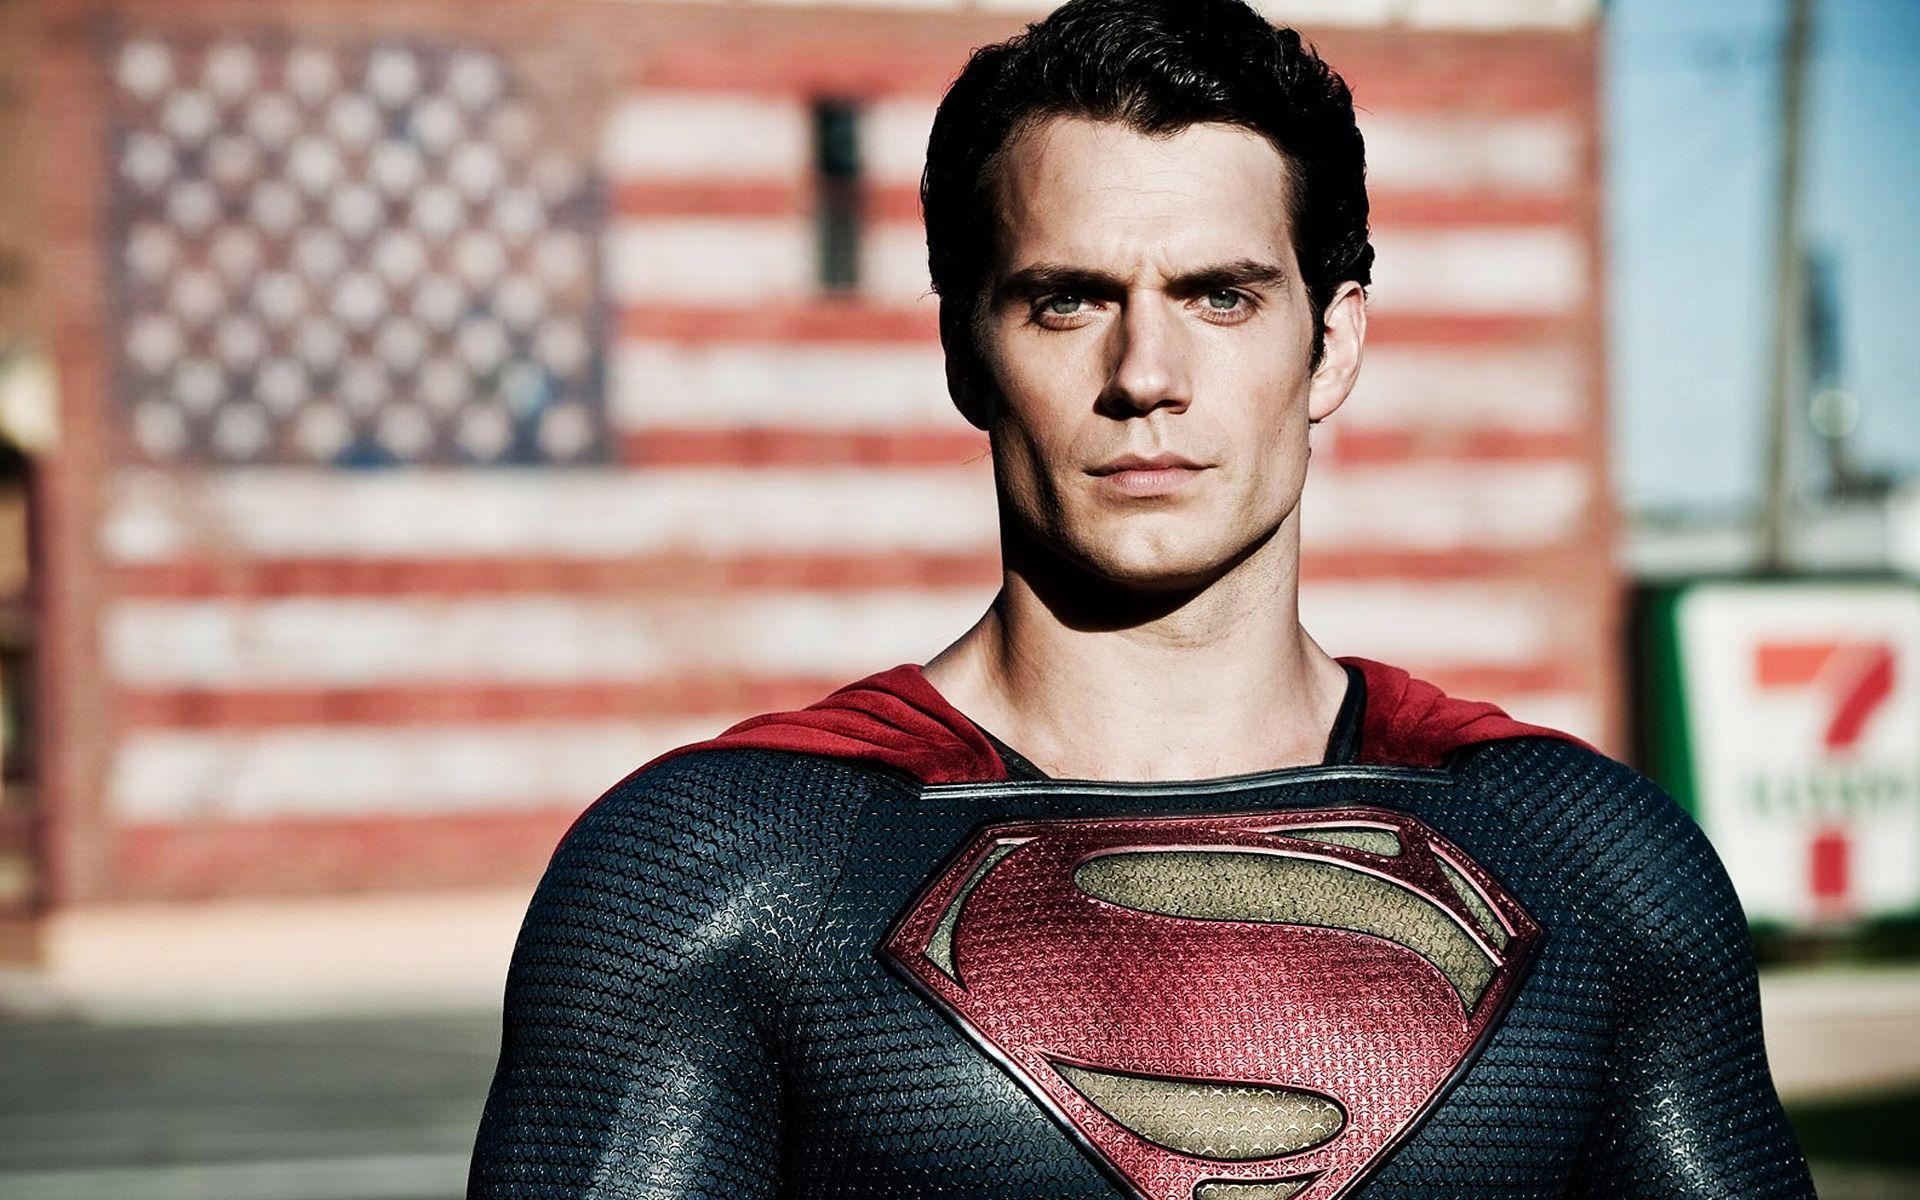 APPRECIATION: A few of my favorite wallpapers of Henry Cavill